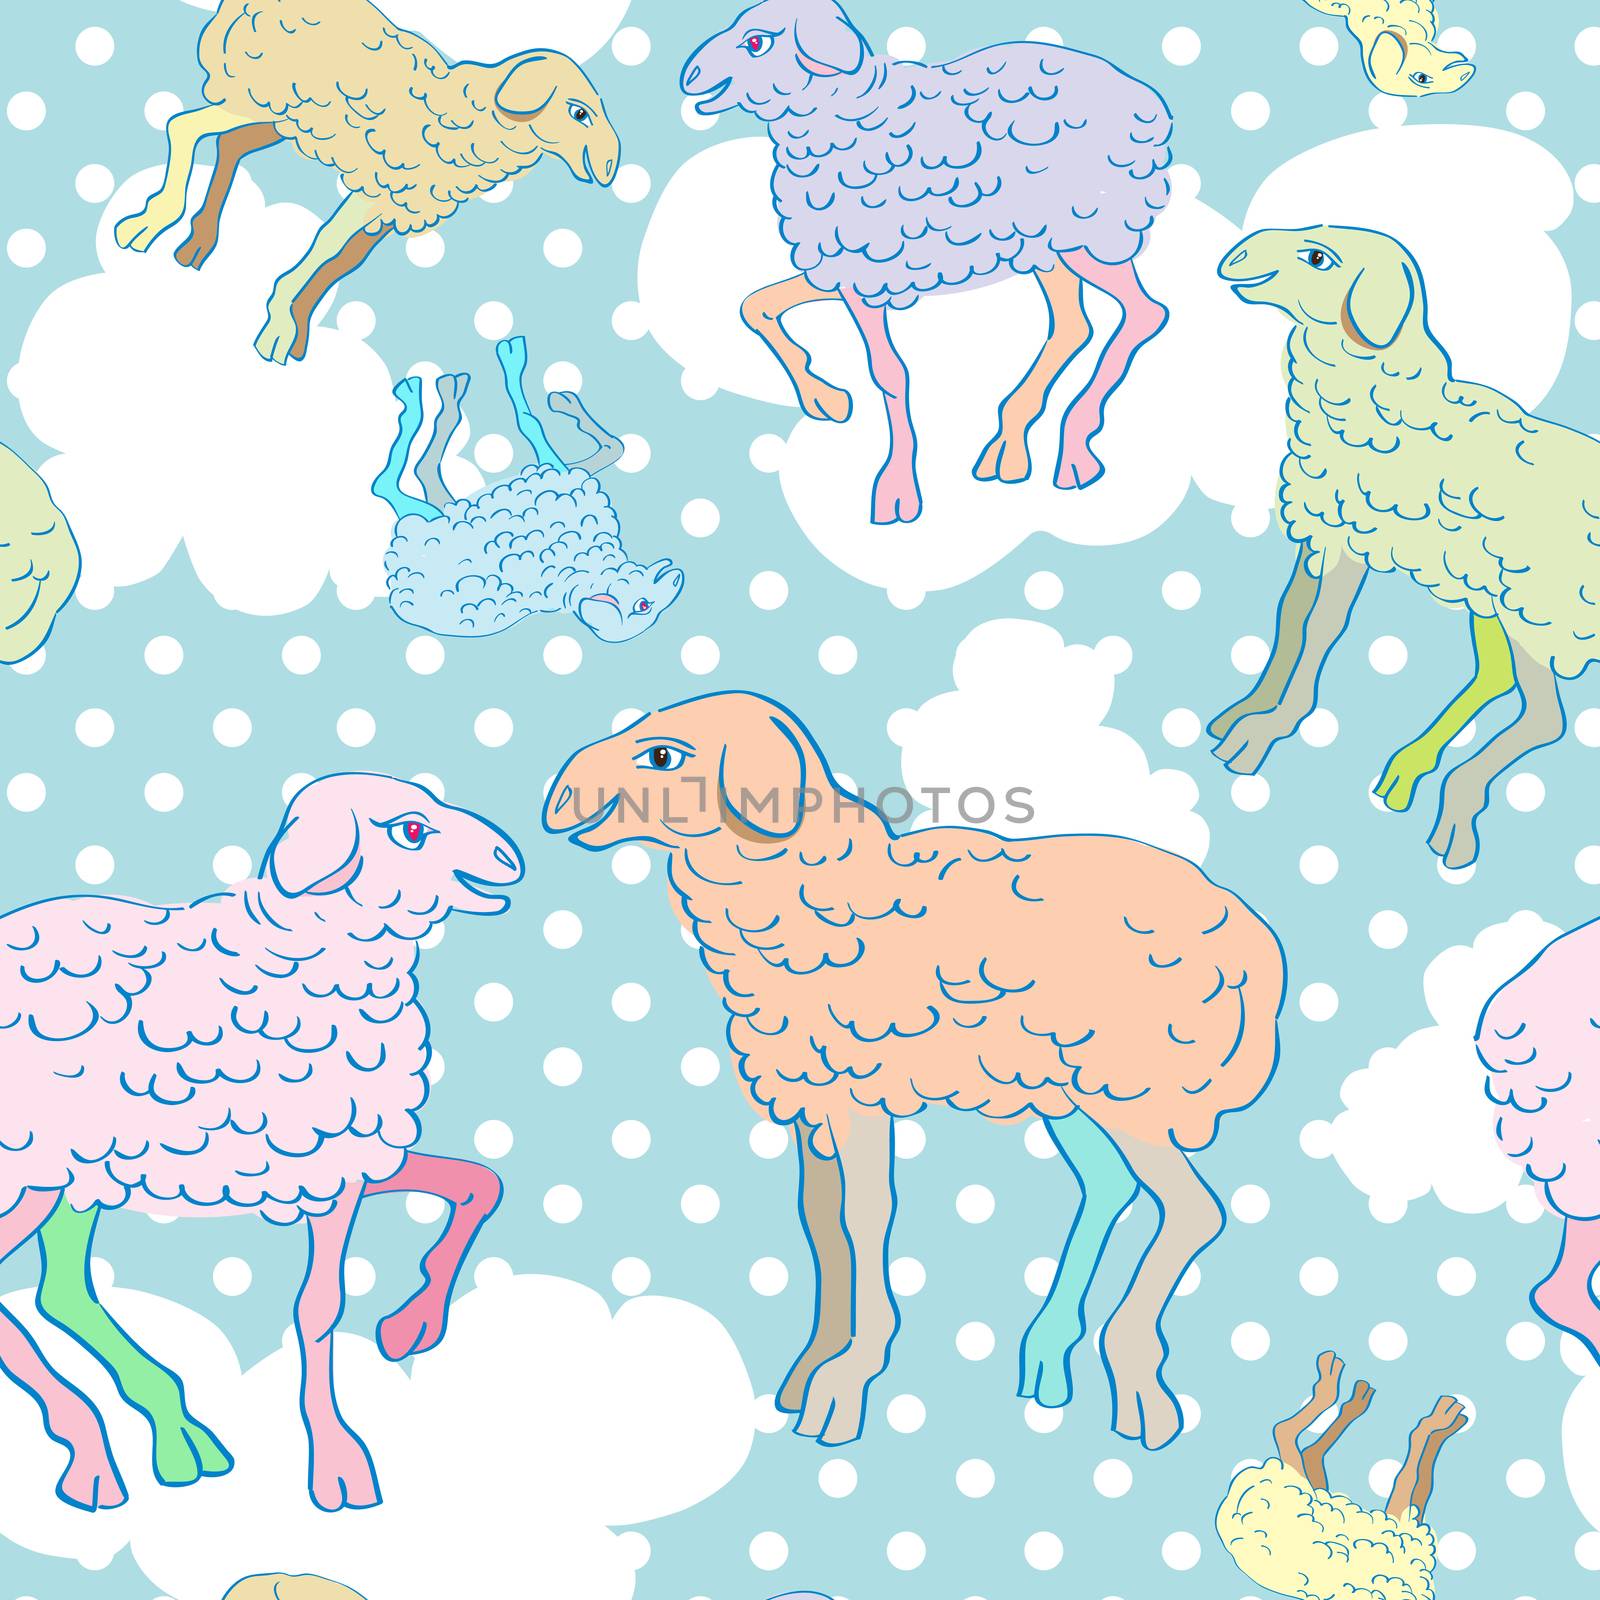 Sheep cartoons seamles pattern, childish illustration over a background with dots and clouds